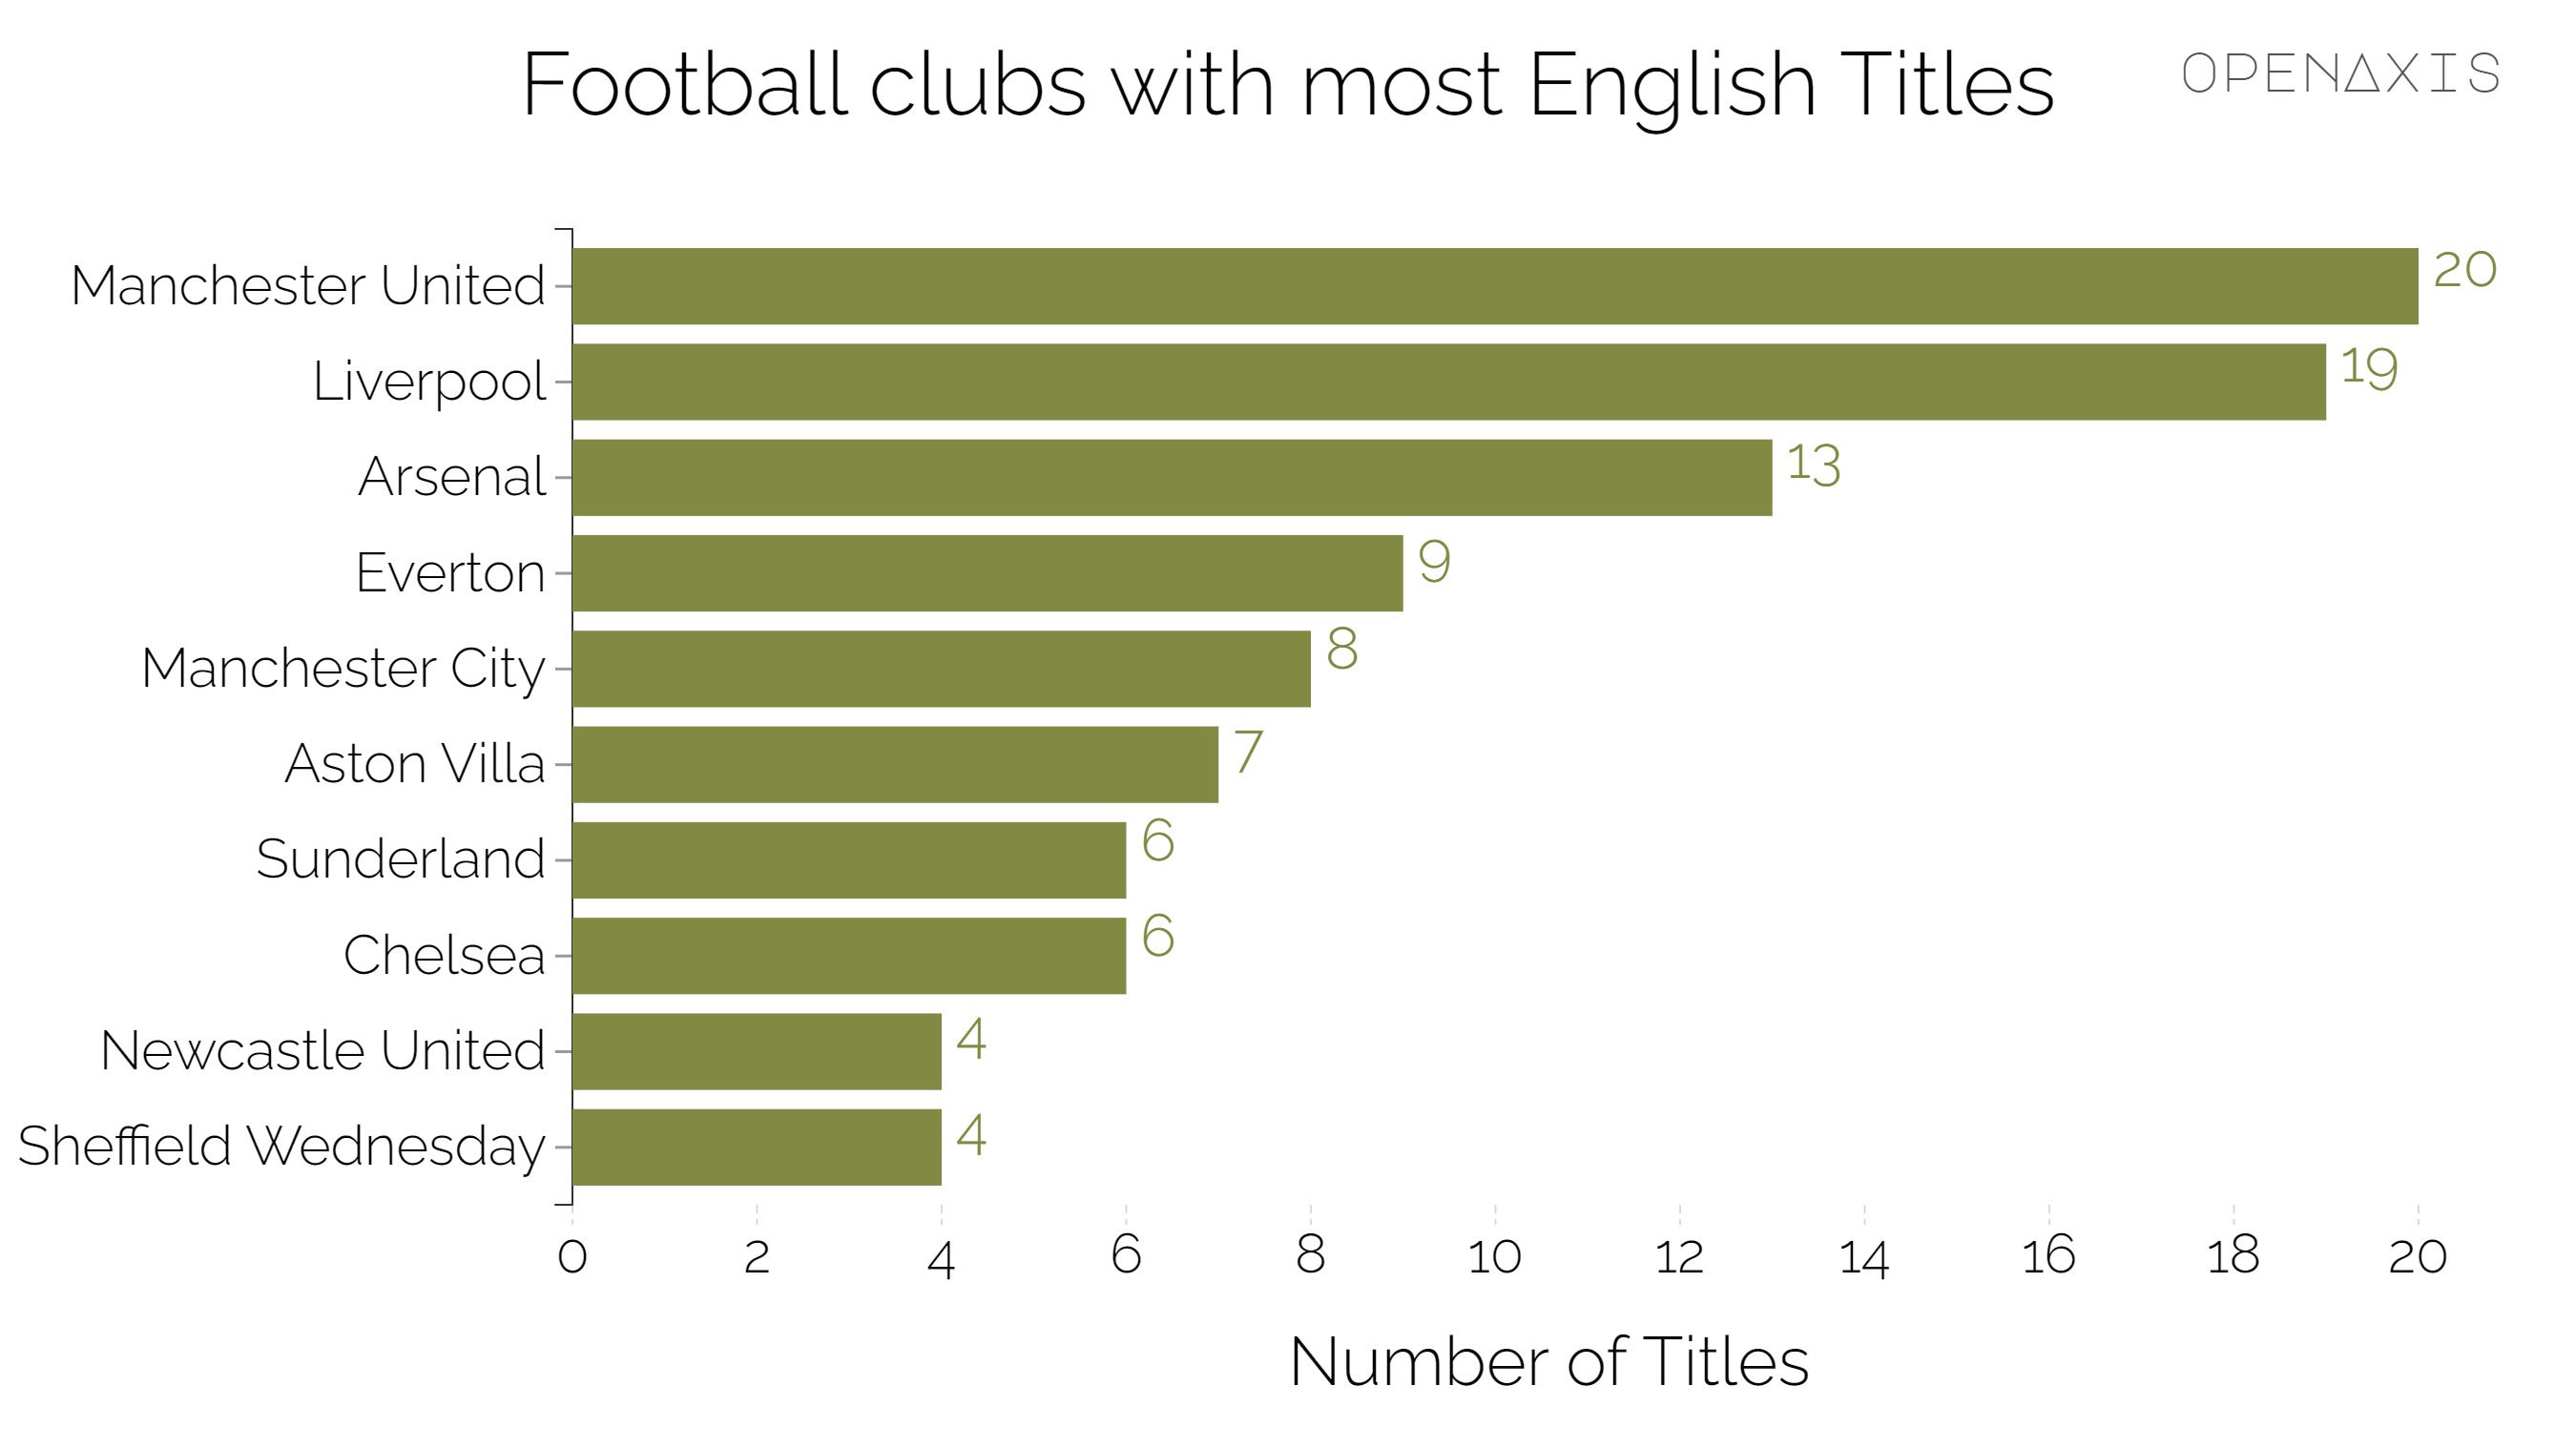 "Football clubs with most English Titles"